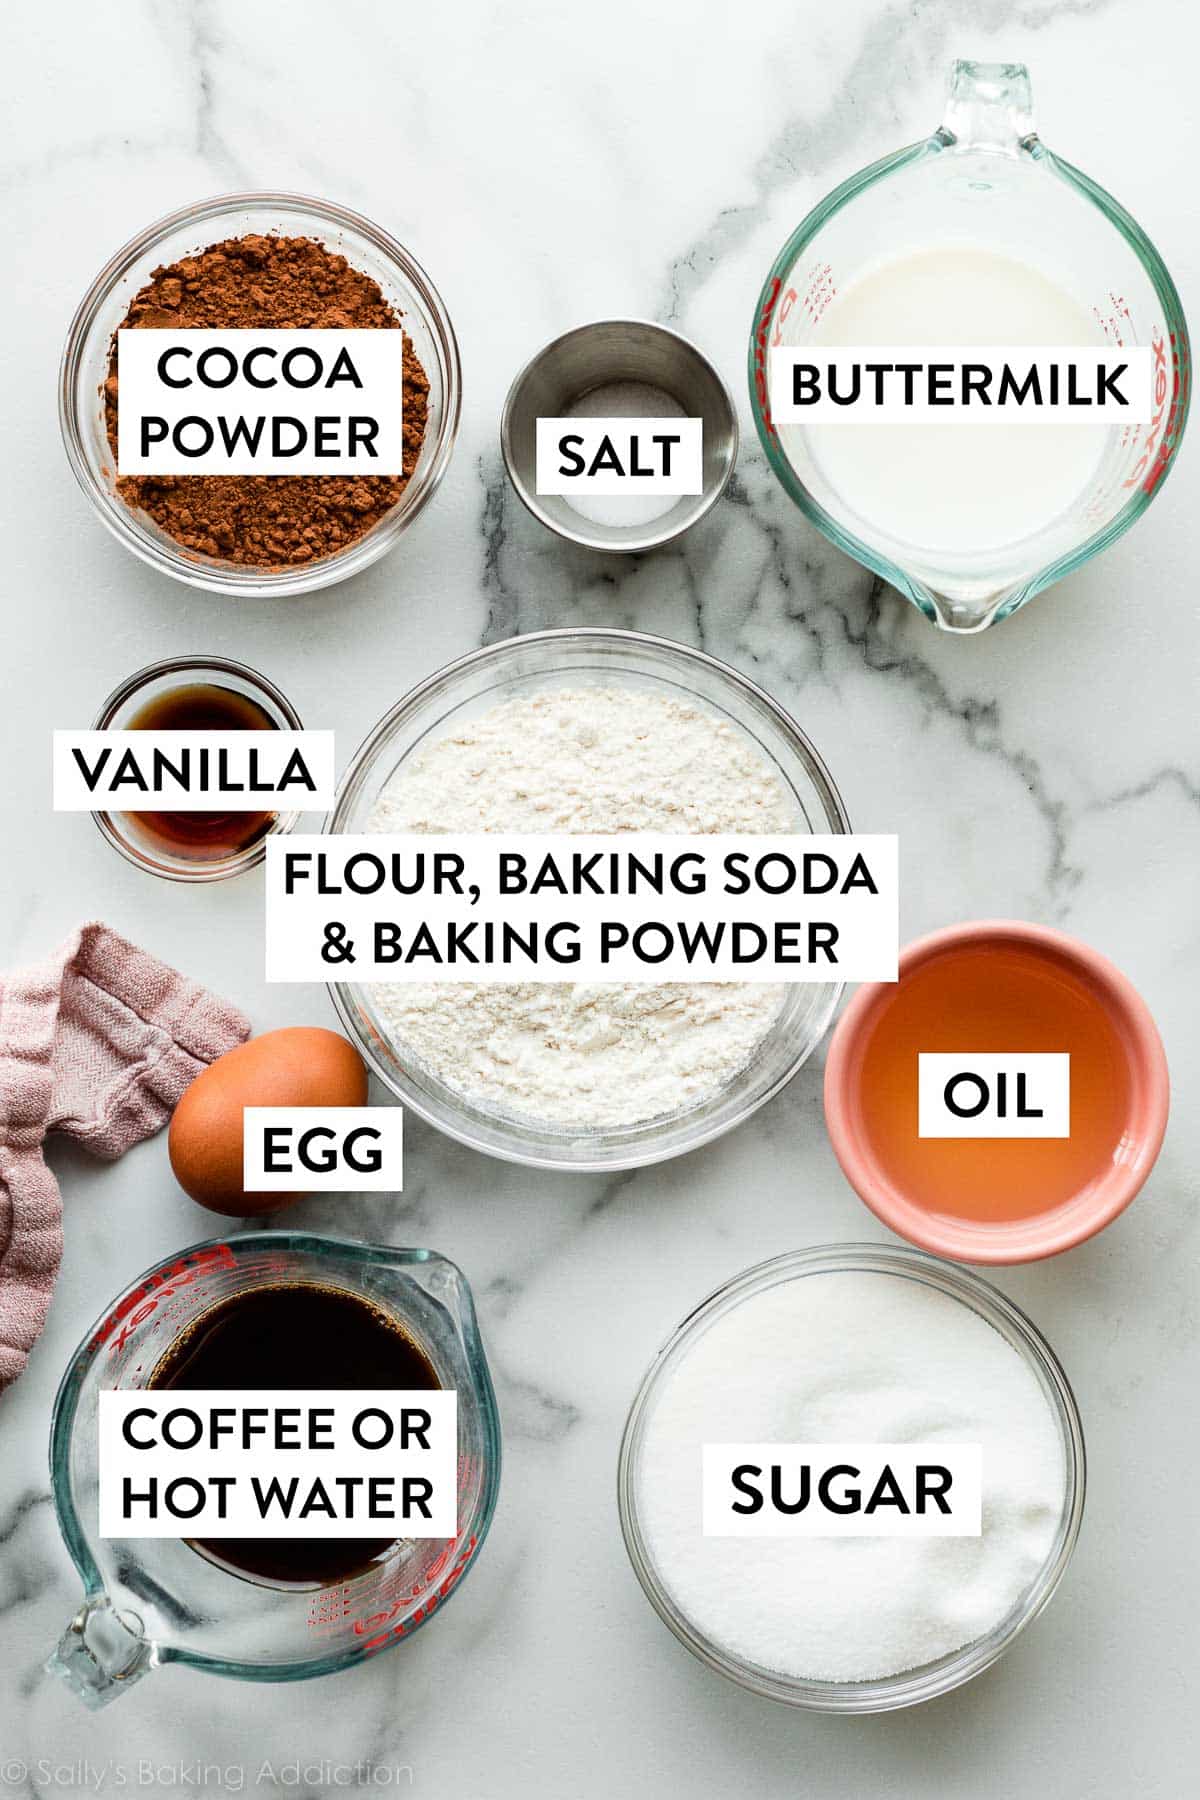 flour, baking soda, baking powder, oil, buttermilk, cocoa powder, coffee, and other ingredients on counter.